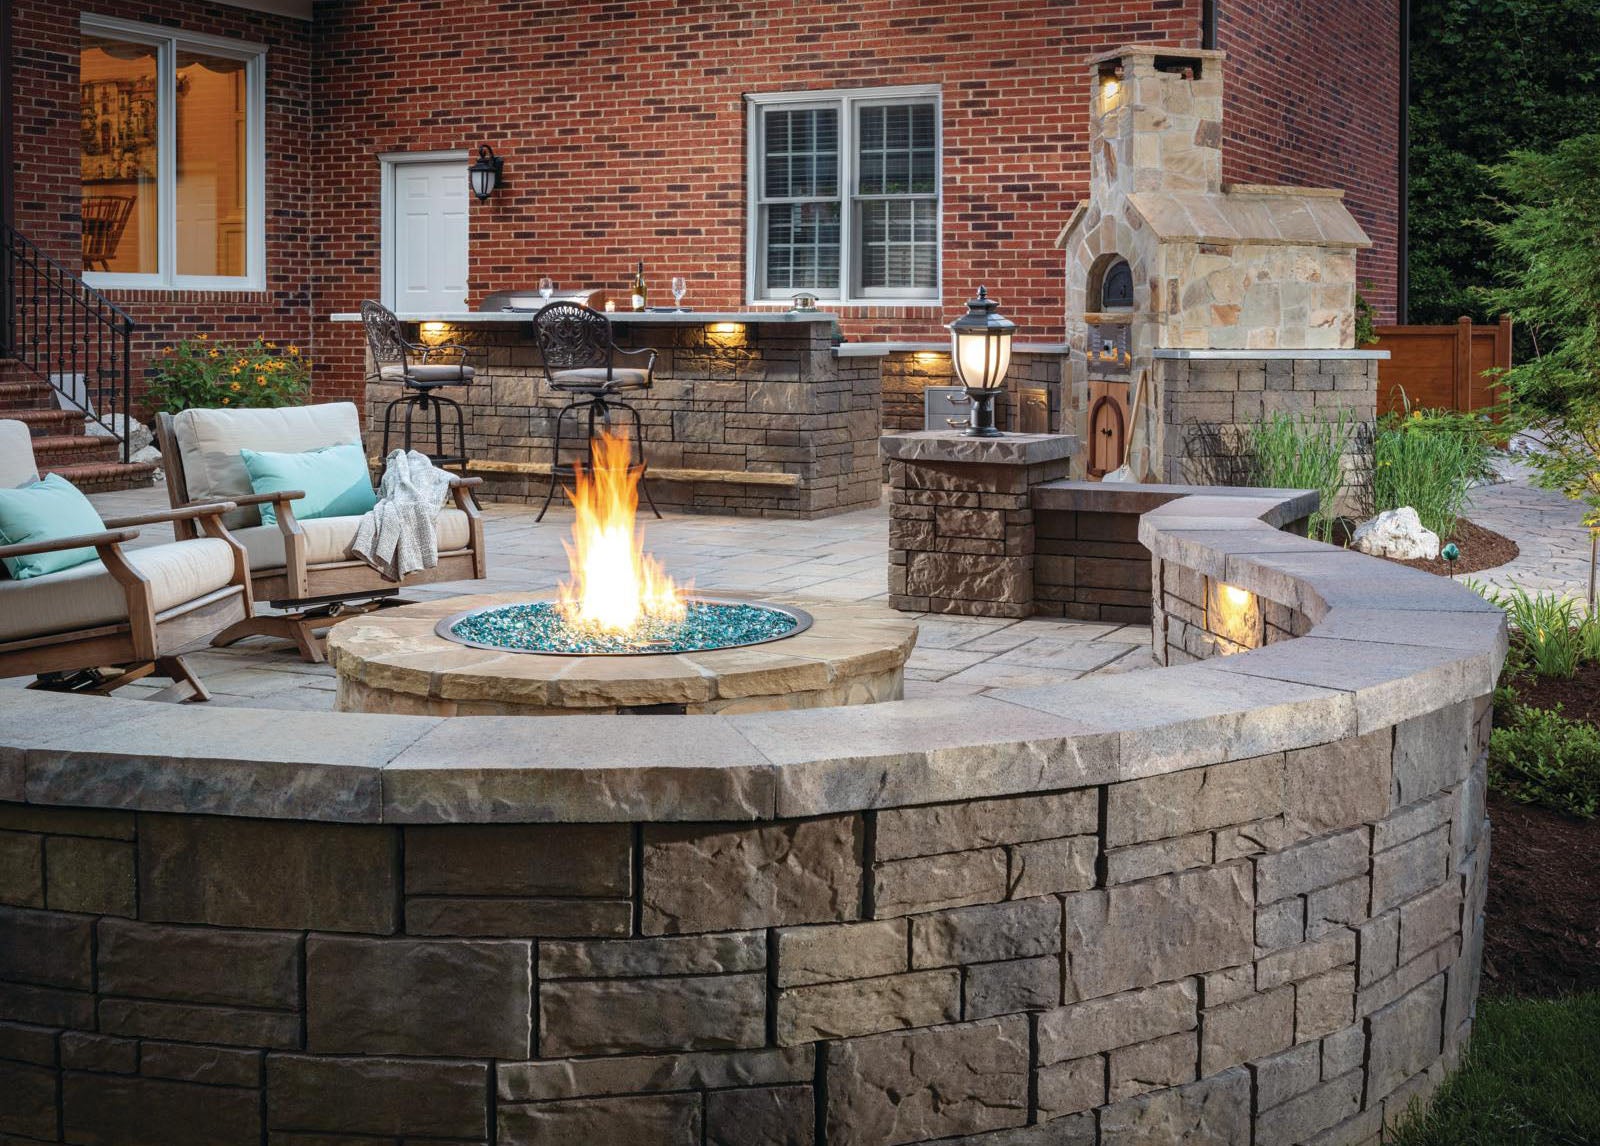 Designing A Patio Around Fire Pit, How To Fire Pits Outdoor